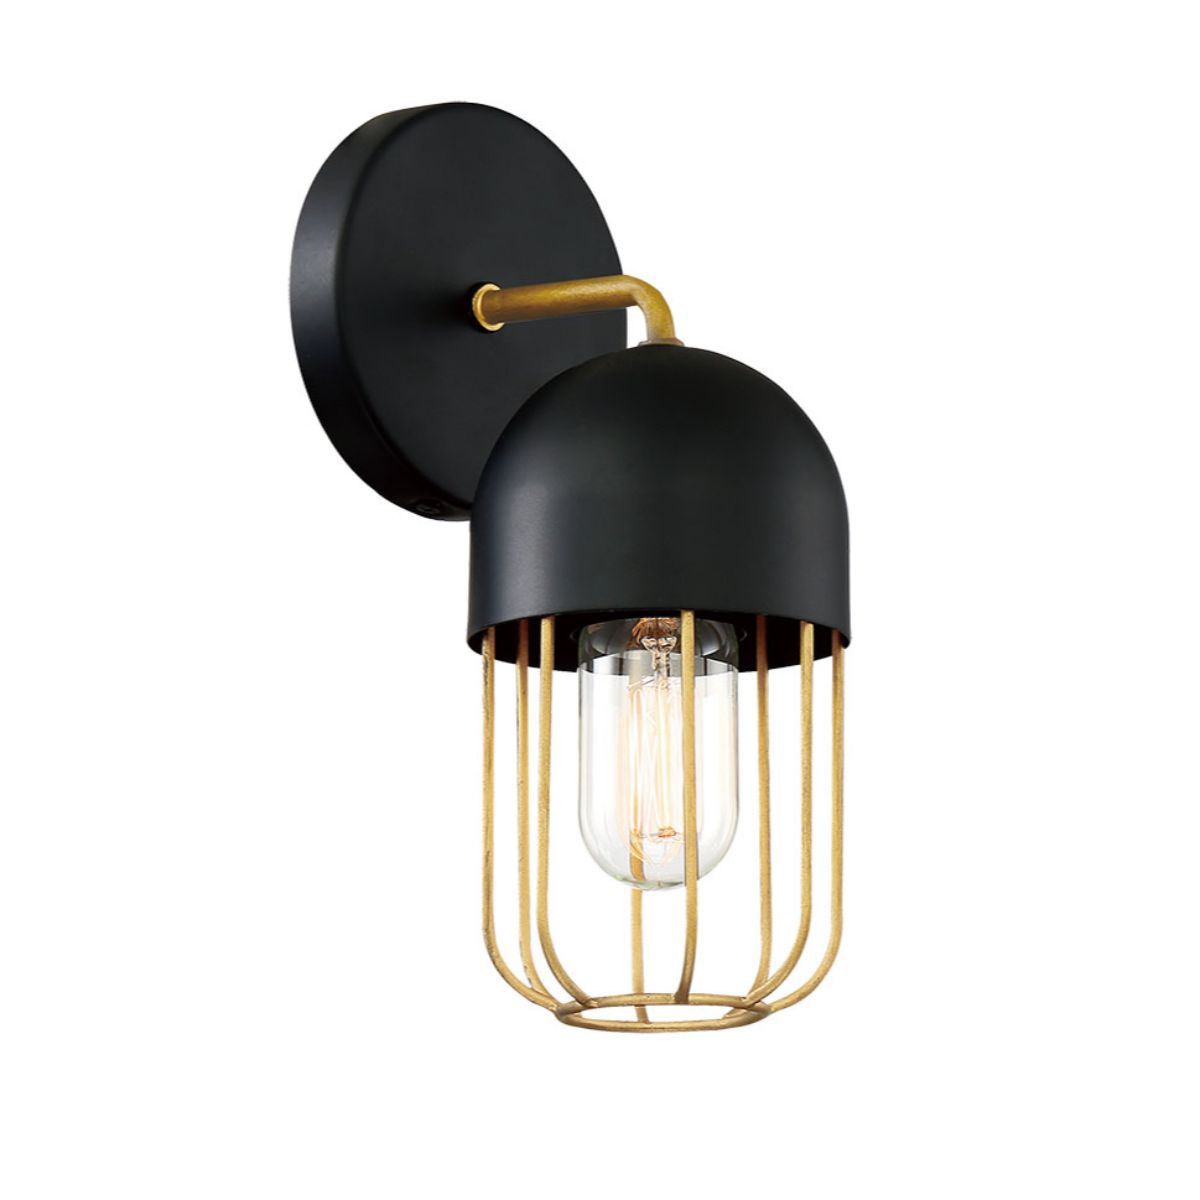 Palmerston 11 in. Armed Sconce Black Finish